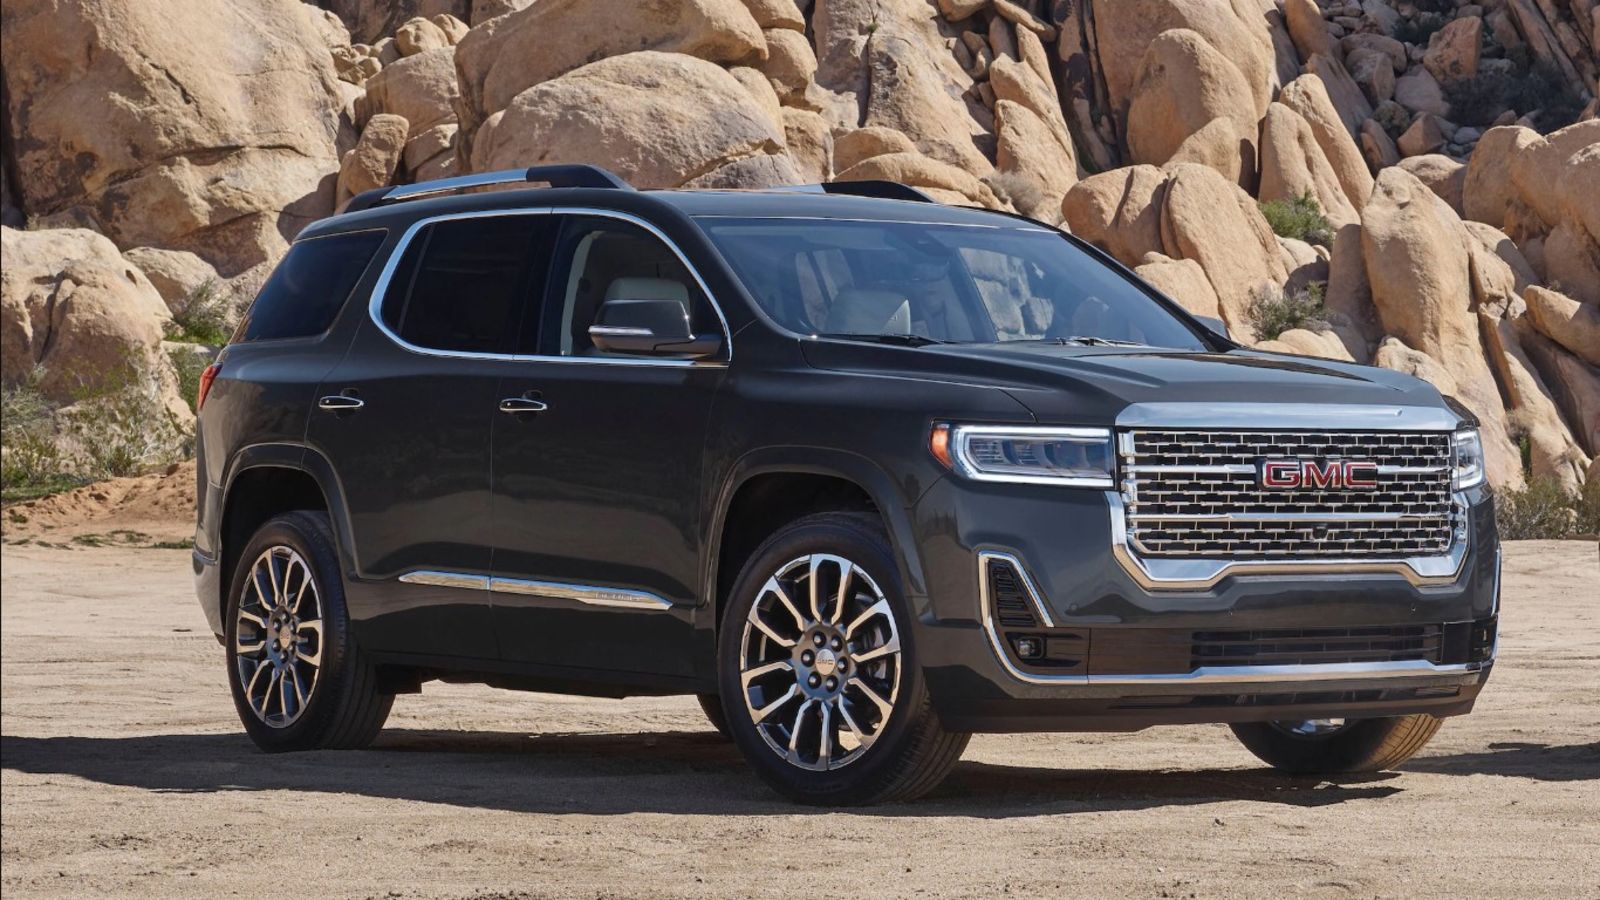 Illustration for article titled The 2020 GMC Acadia starts at $30,995